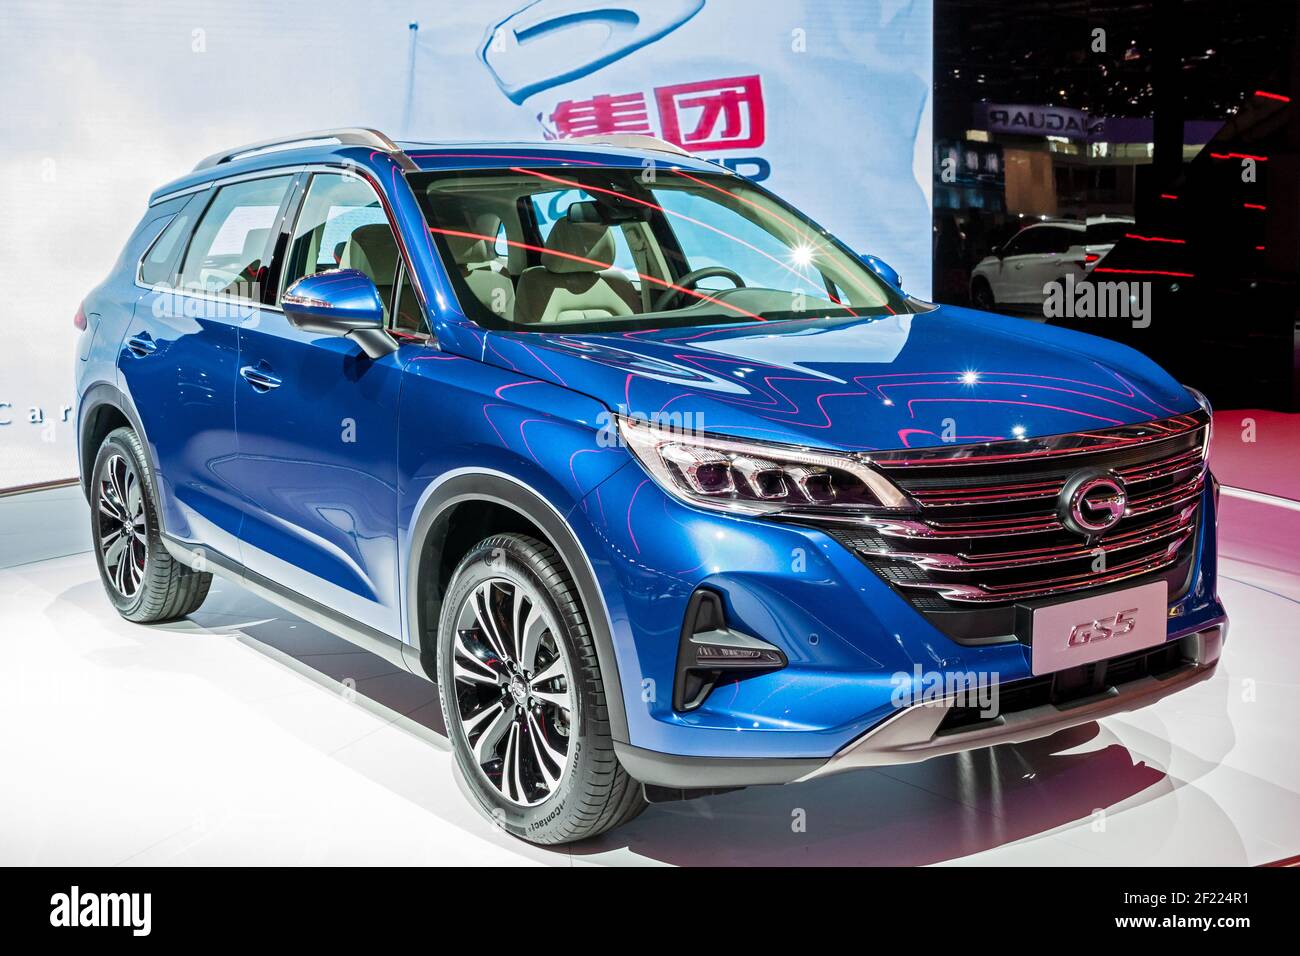 GAC Trumpchi GS5 Chinese compact crossover SUV car at the Paris Motor Show  in Expo Porte de Versailles. France - October 3, 2018 Stock Photo - Alamy